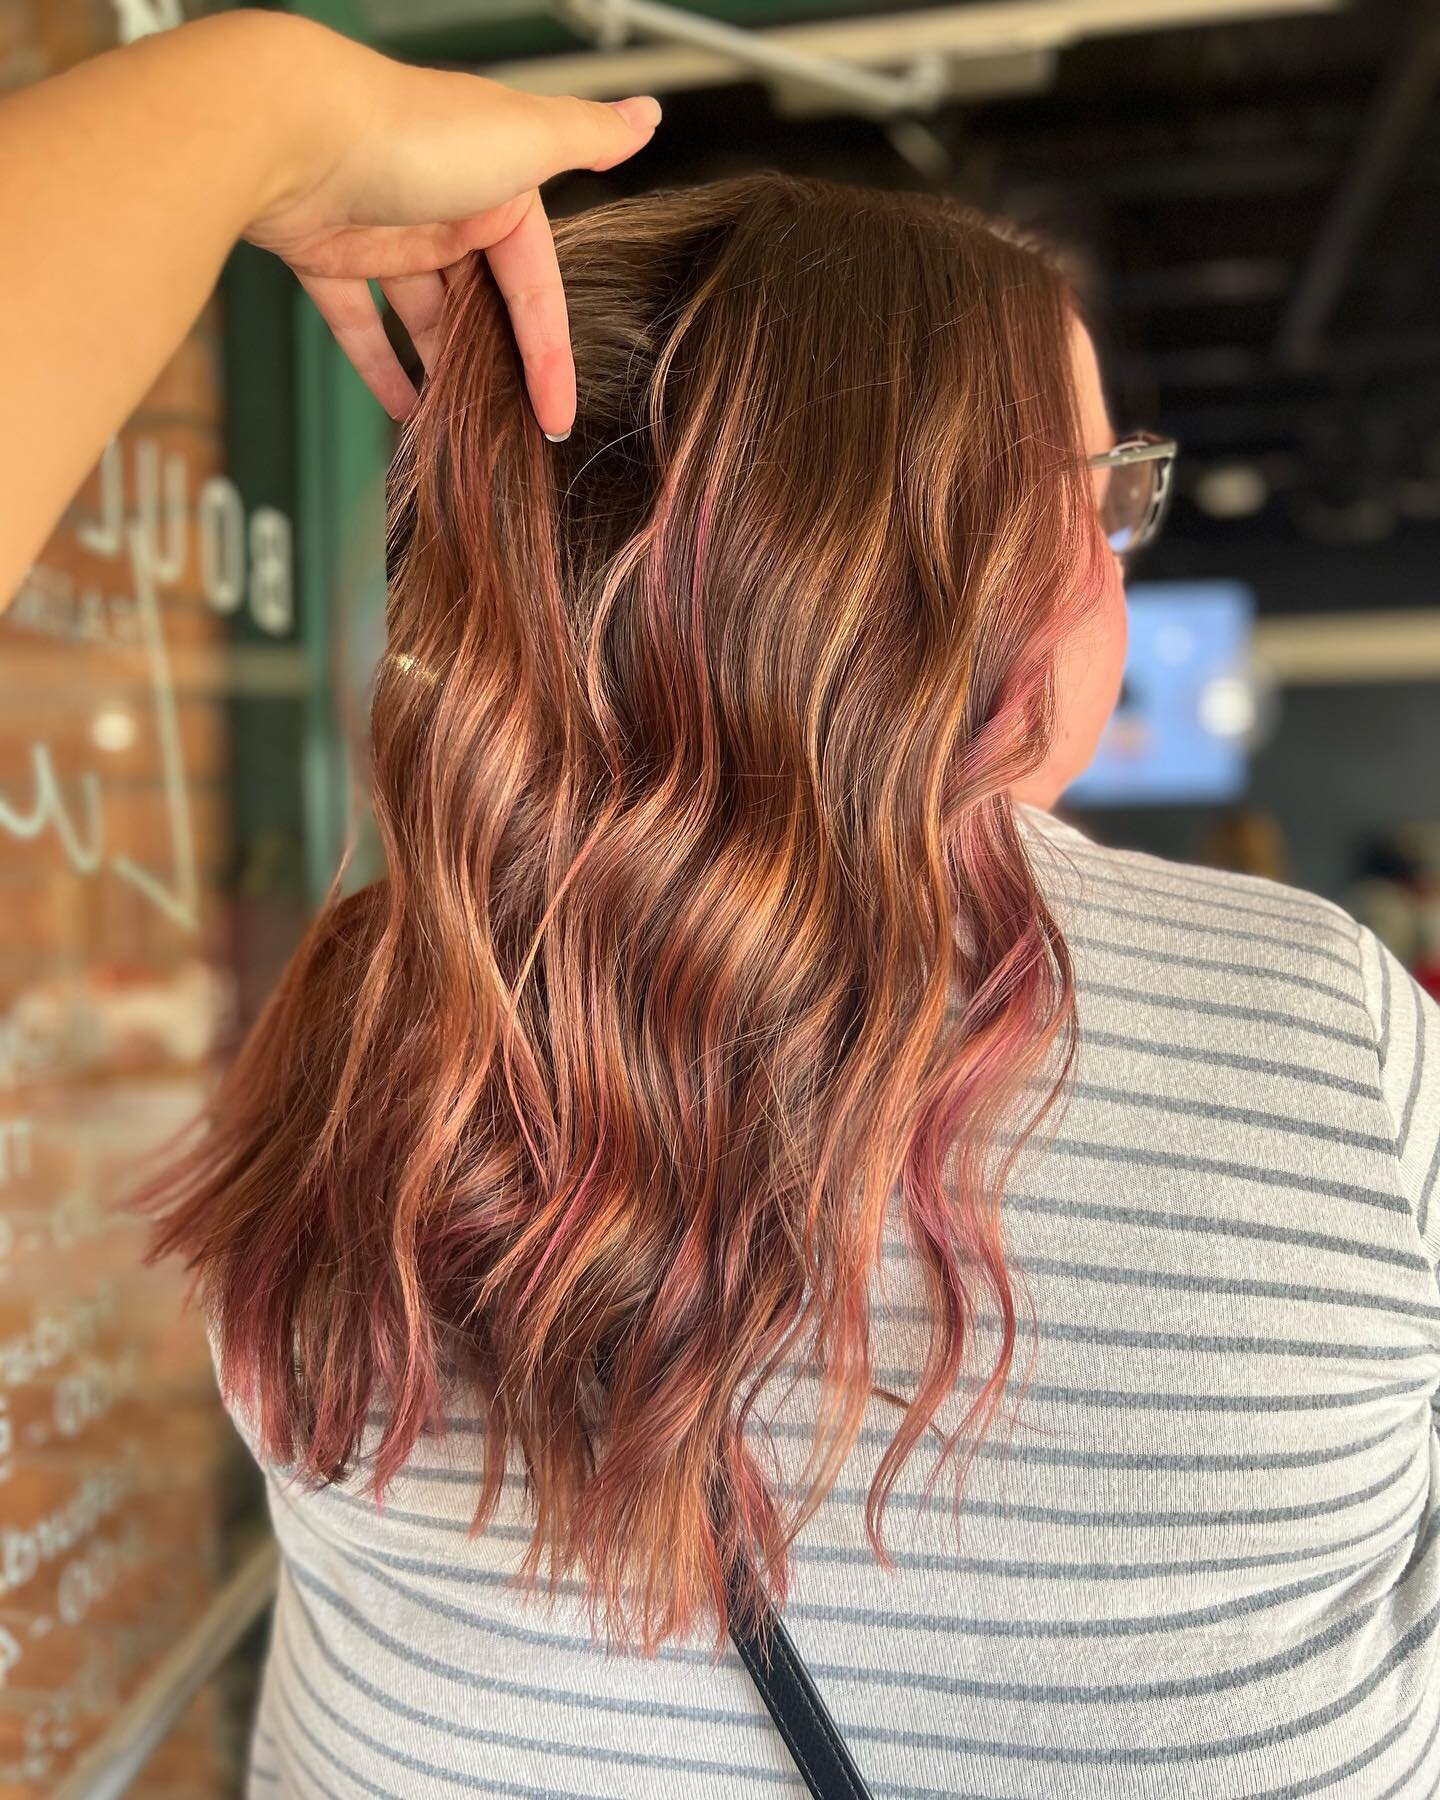 Rose gold dreams 🦩
Featuring a &ldquo;I almost forgot to take the before pic&rdquo; picture 🤪
- - -

#stlstylist #stlhairstylist #stlhairsalon #stlhaircut #webstergrovesmo #websteruniversity #salonblvd #stlmodel #stlcolorist #brownhaircolor #hairtu